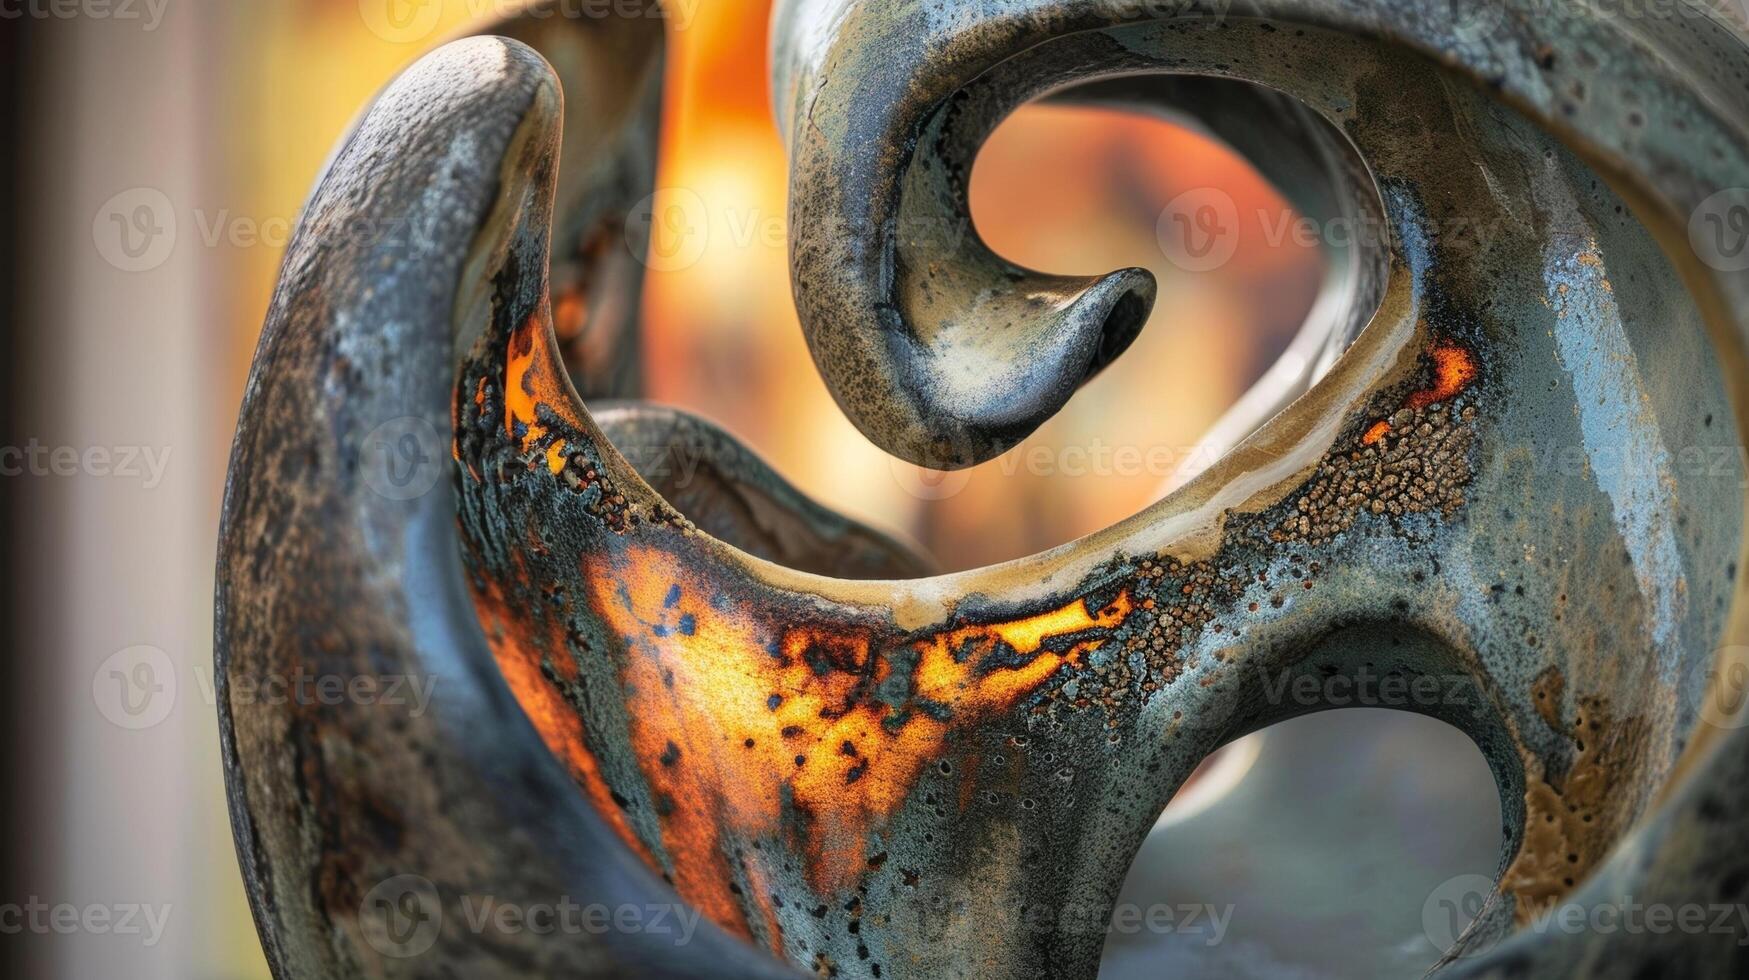 The use of raku firing technique to add a dramatic flair to a massive ceramic sculpture. photo